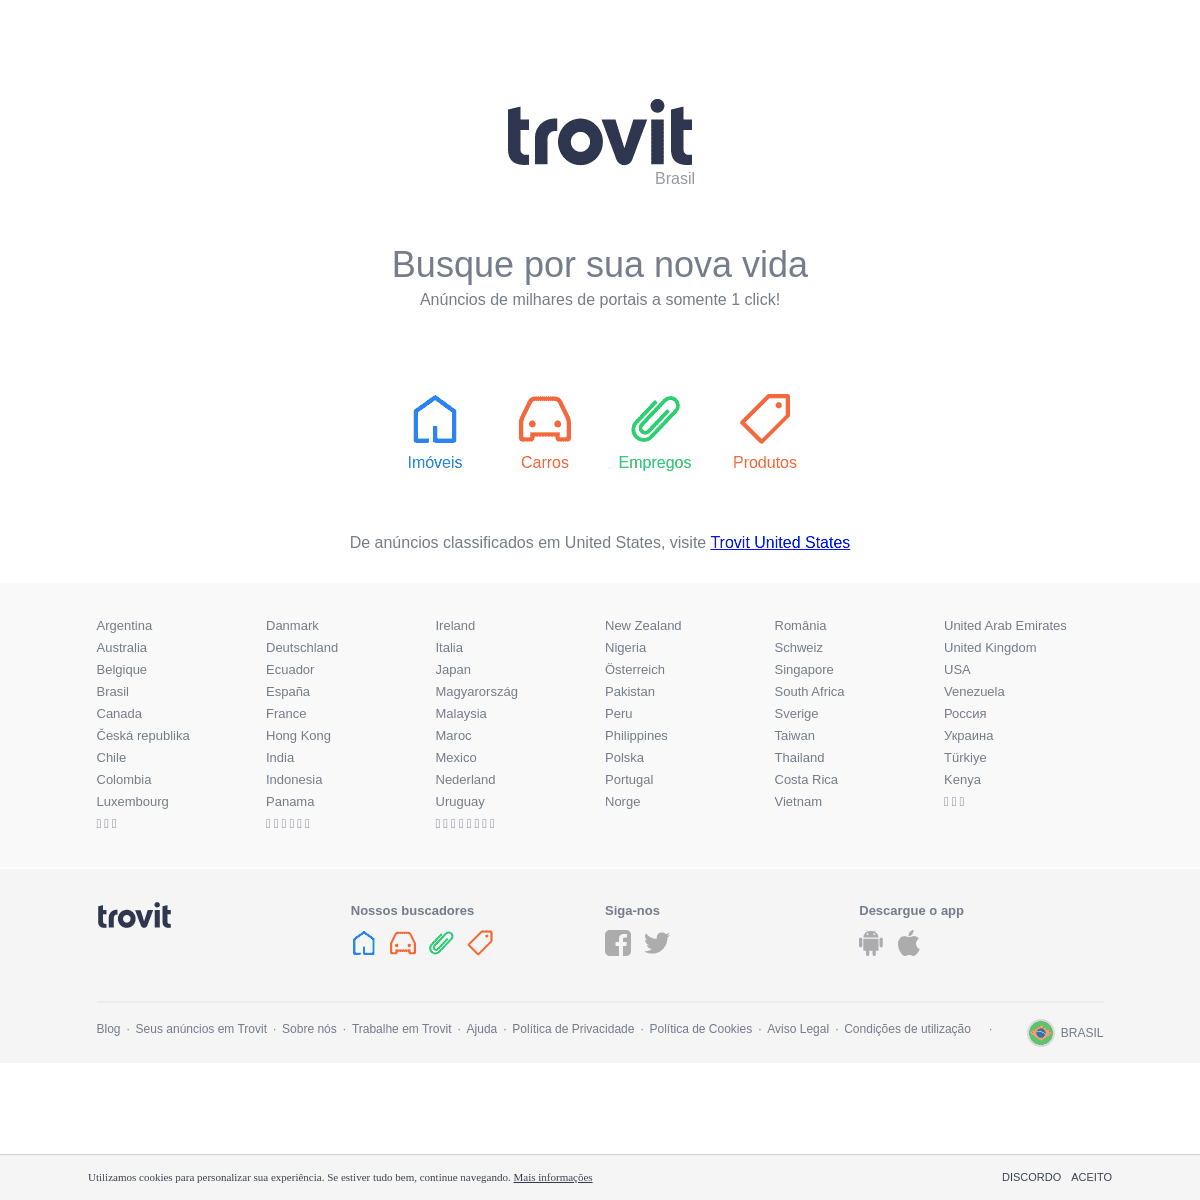 A complete backup of trovit.com.br